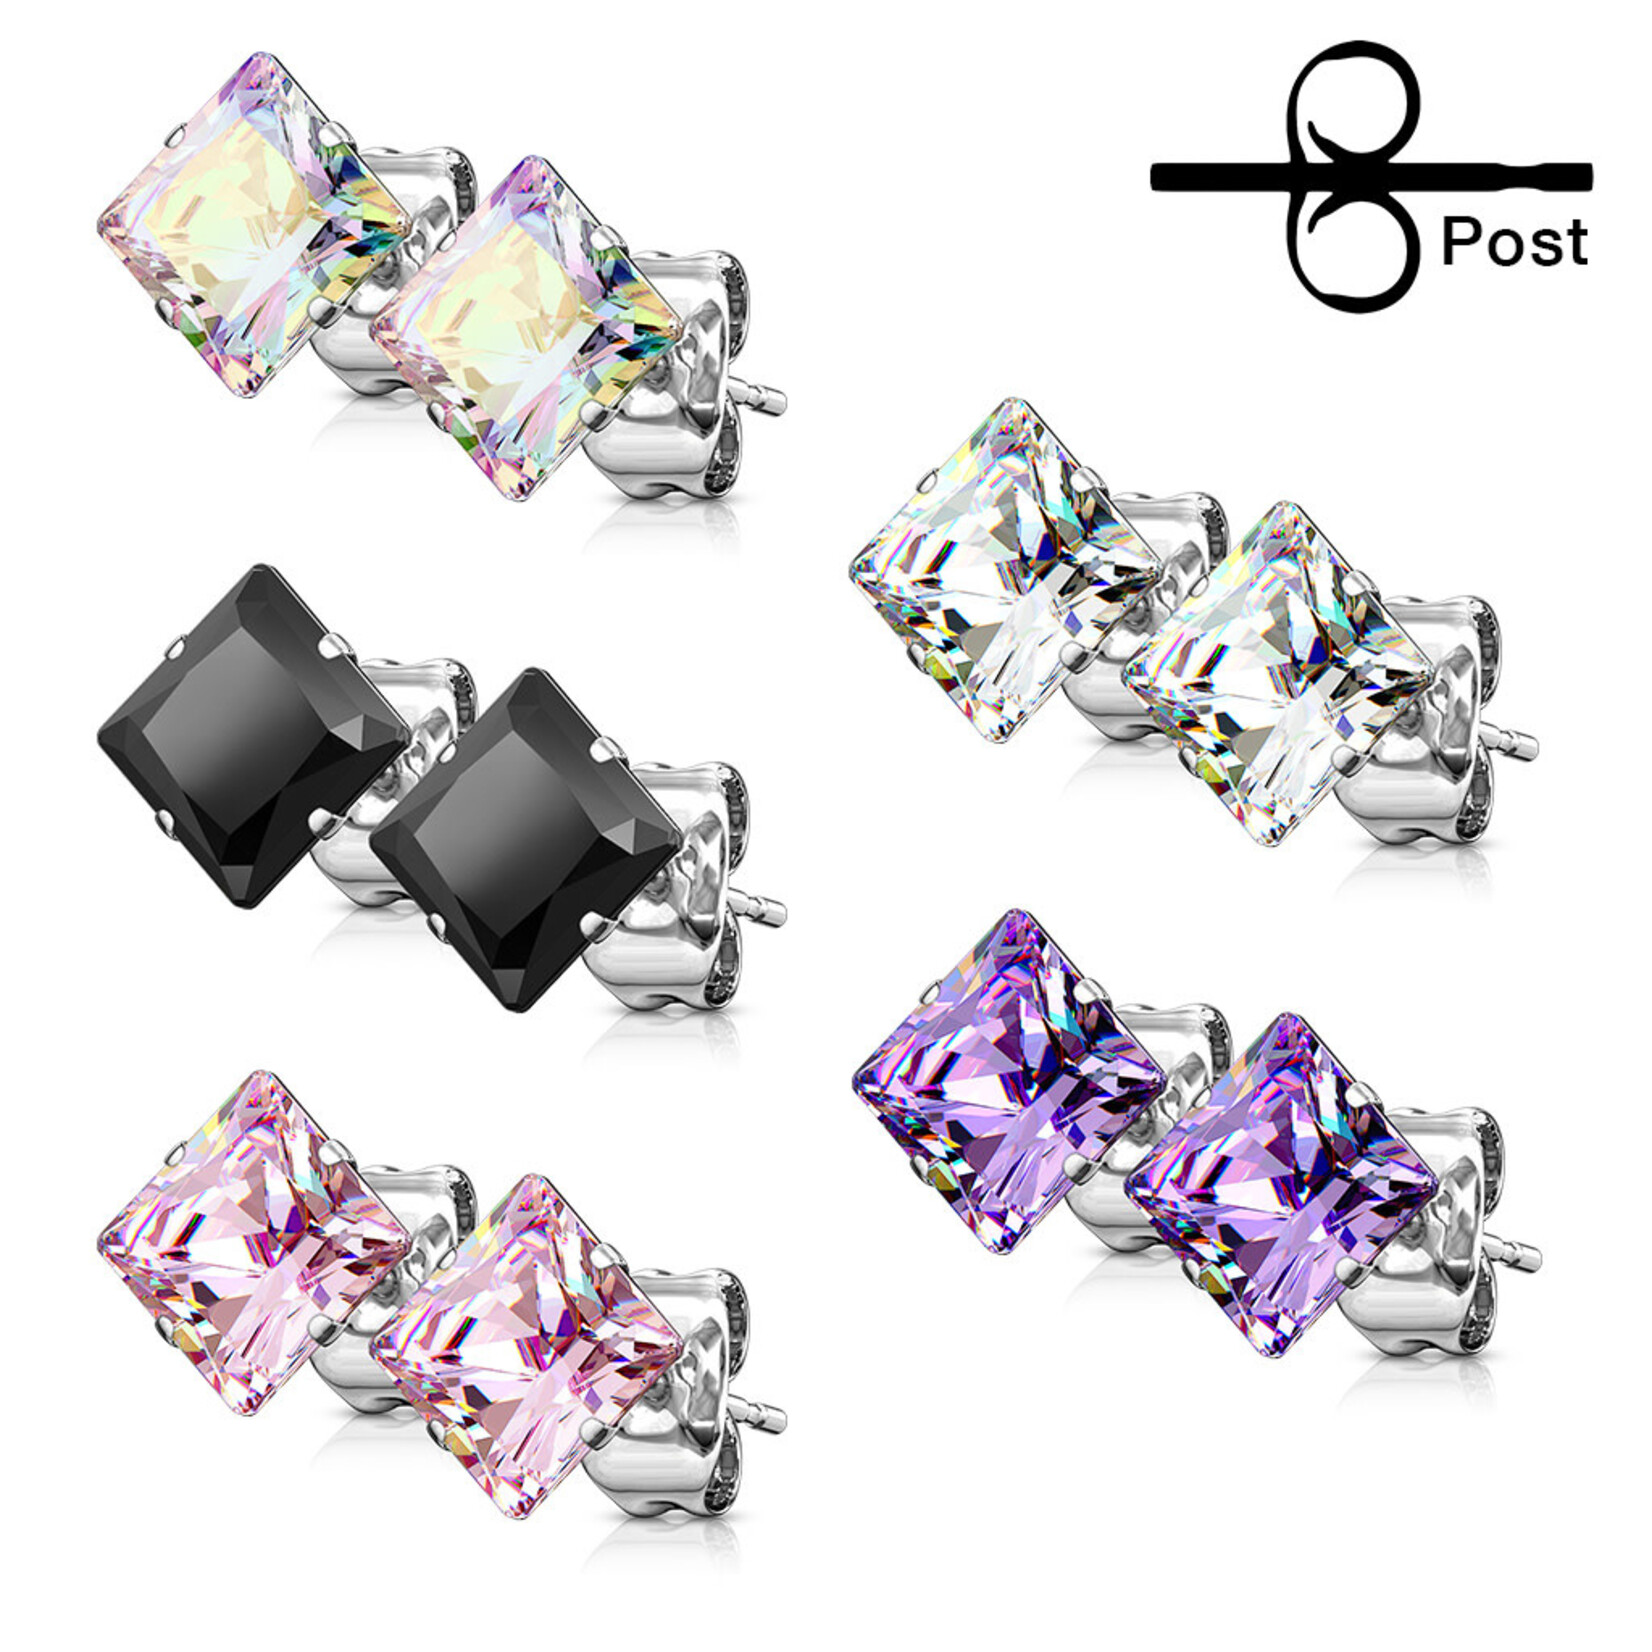 Hollywood Body Jewelry Square Gem Stud Earrings